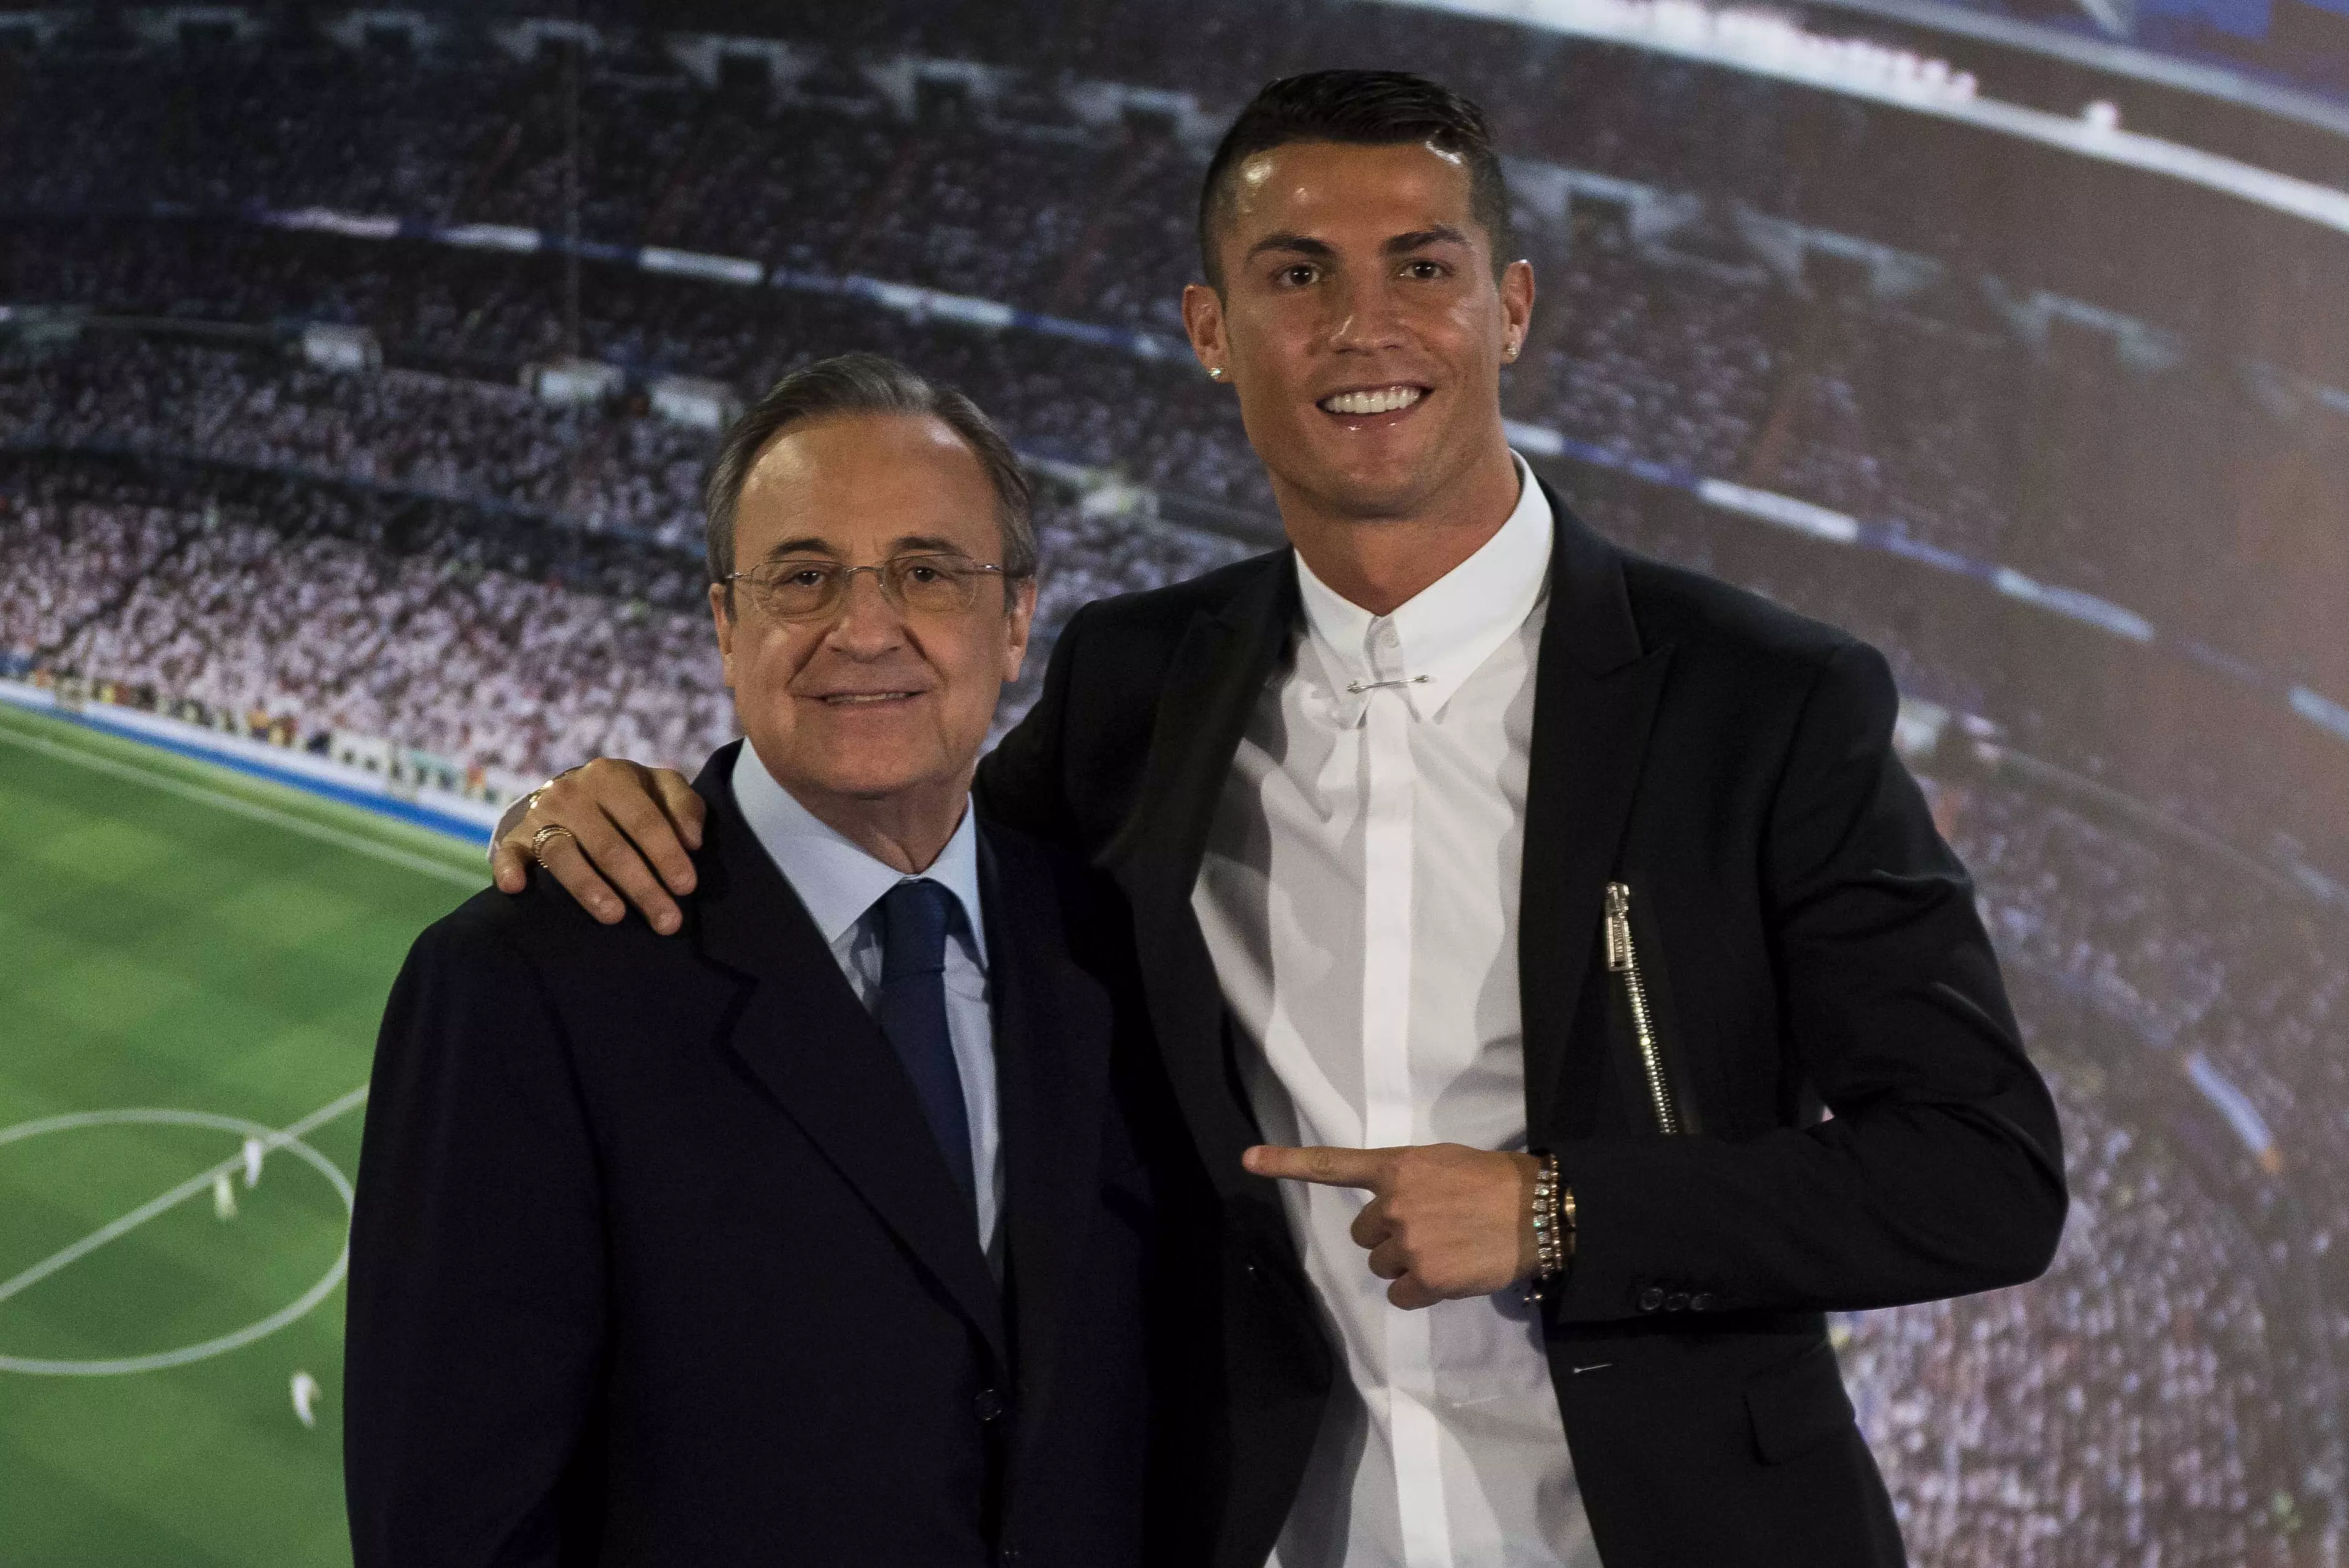 Ronaldo and Perez together. Image: PA Images